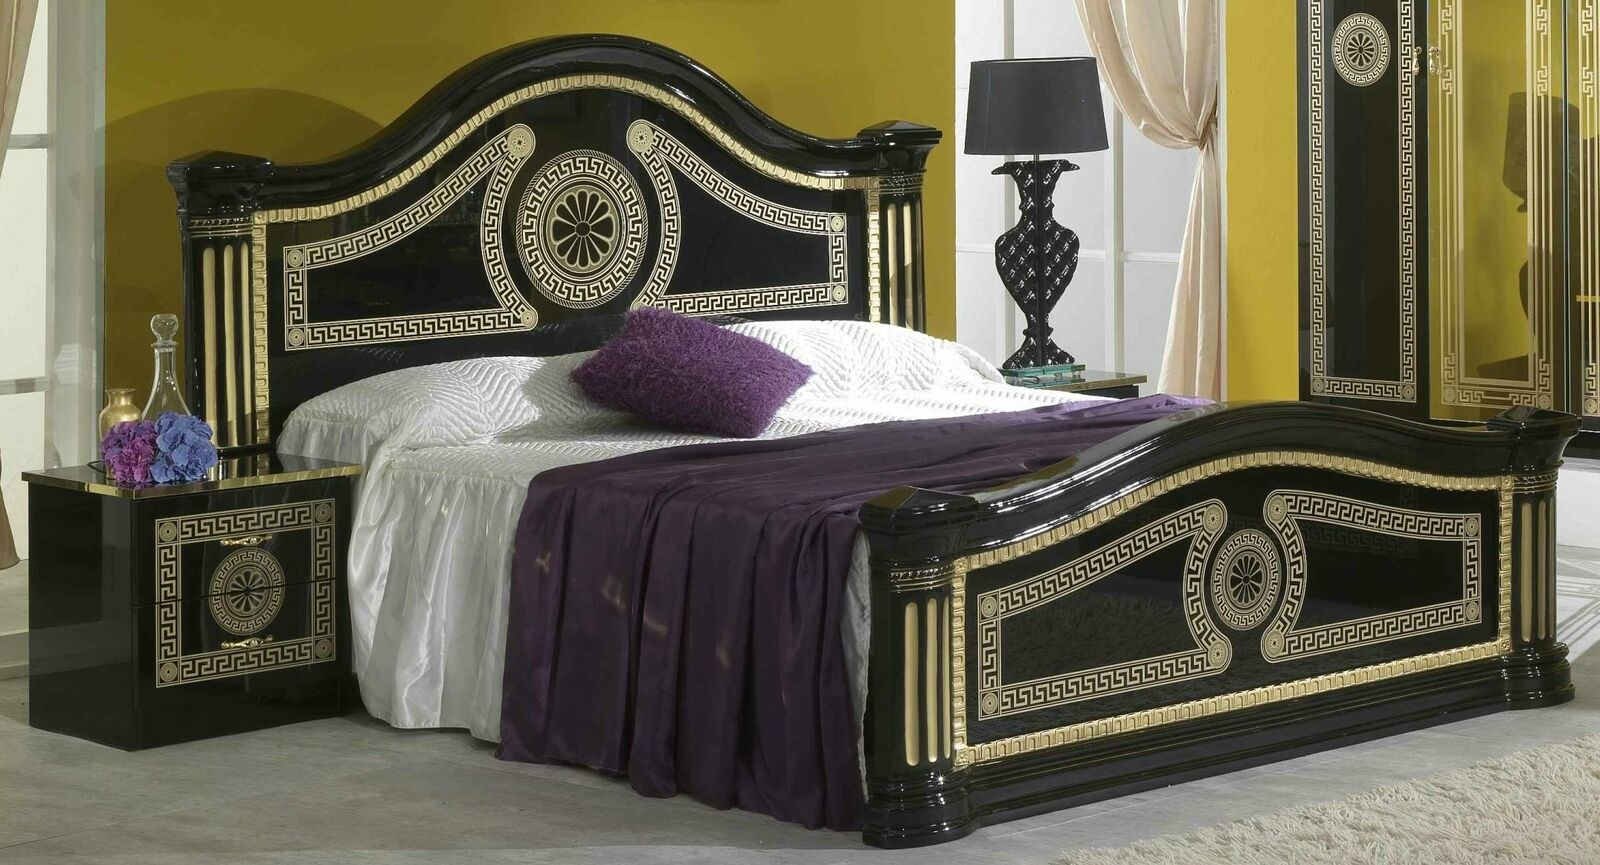 Empire style bedroom set of massive marriage double bed & 2x-bedside tables made of gloss wooden frame